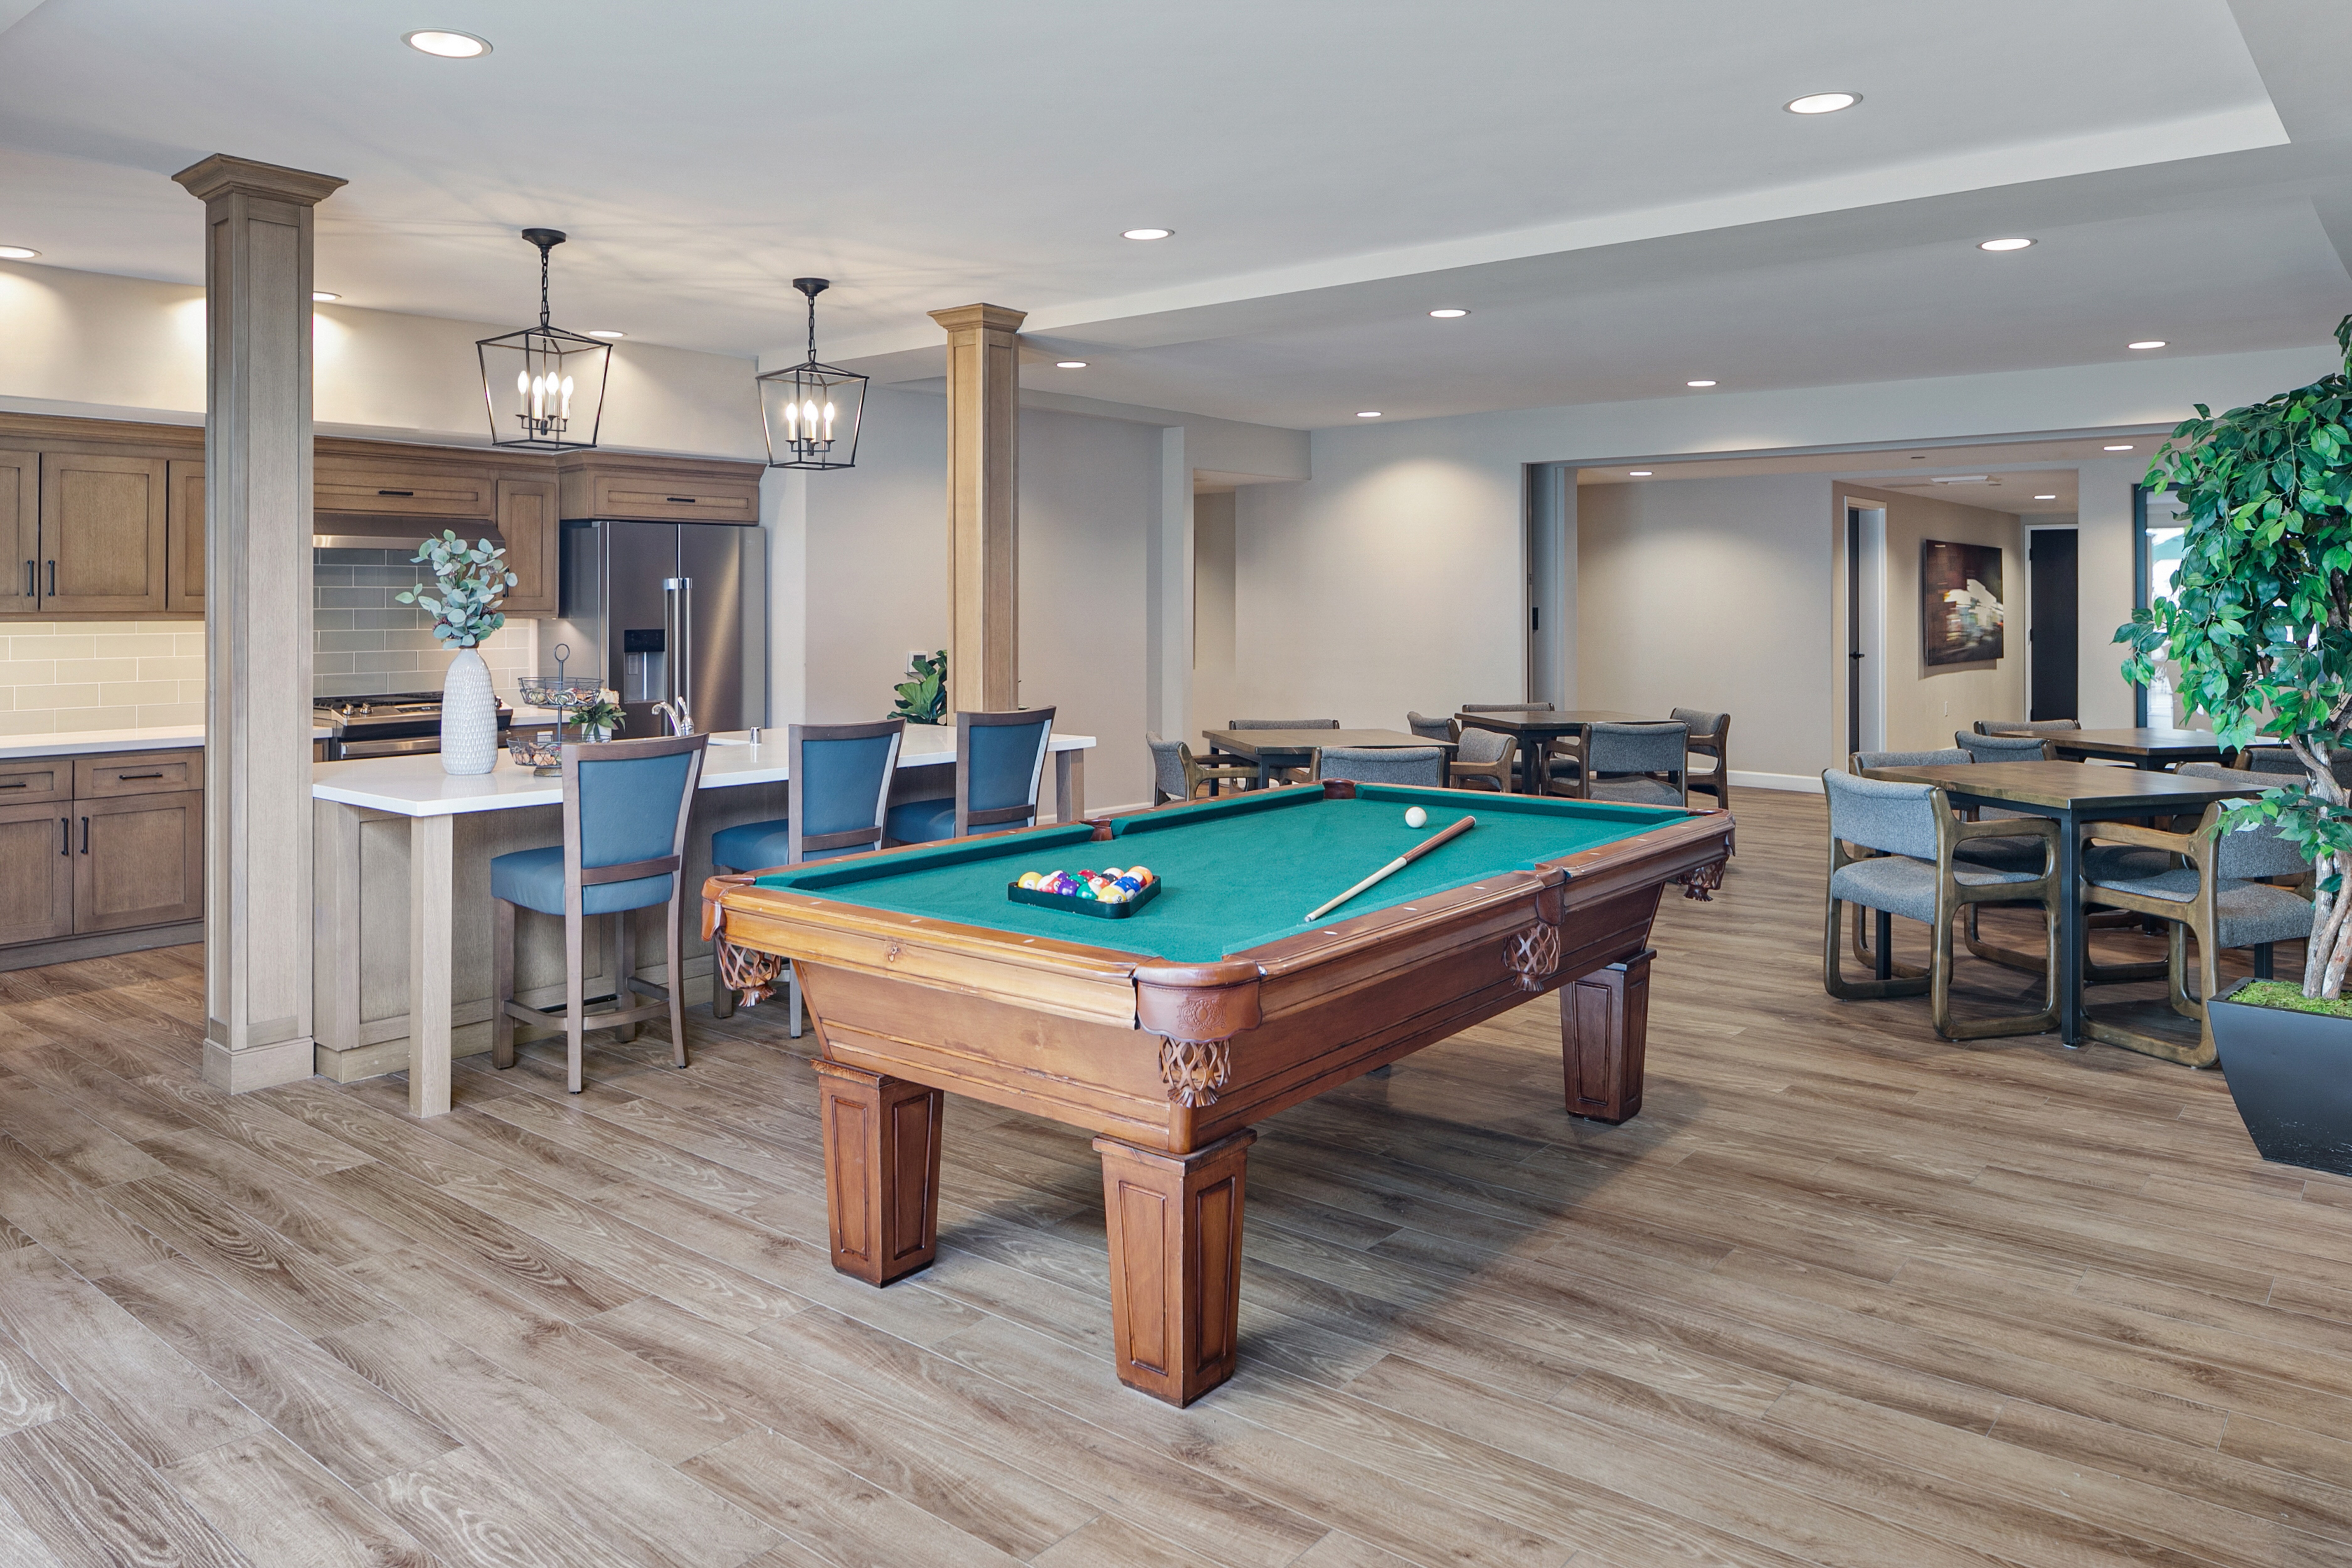 Common area with billiard table, kitchen island, and tables